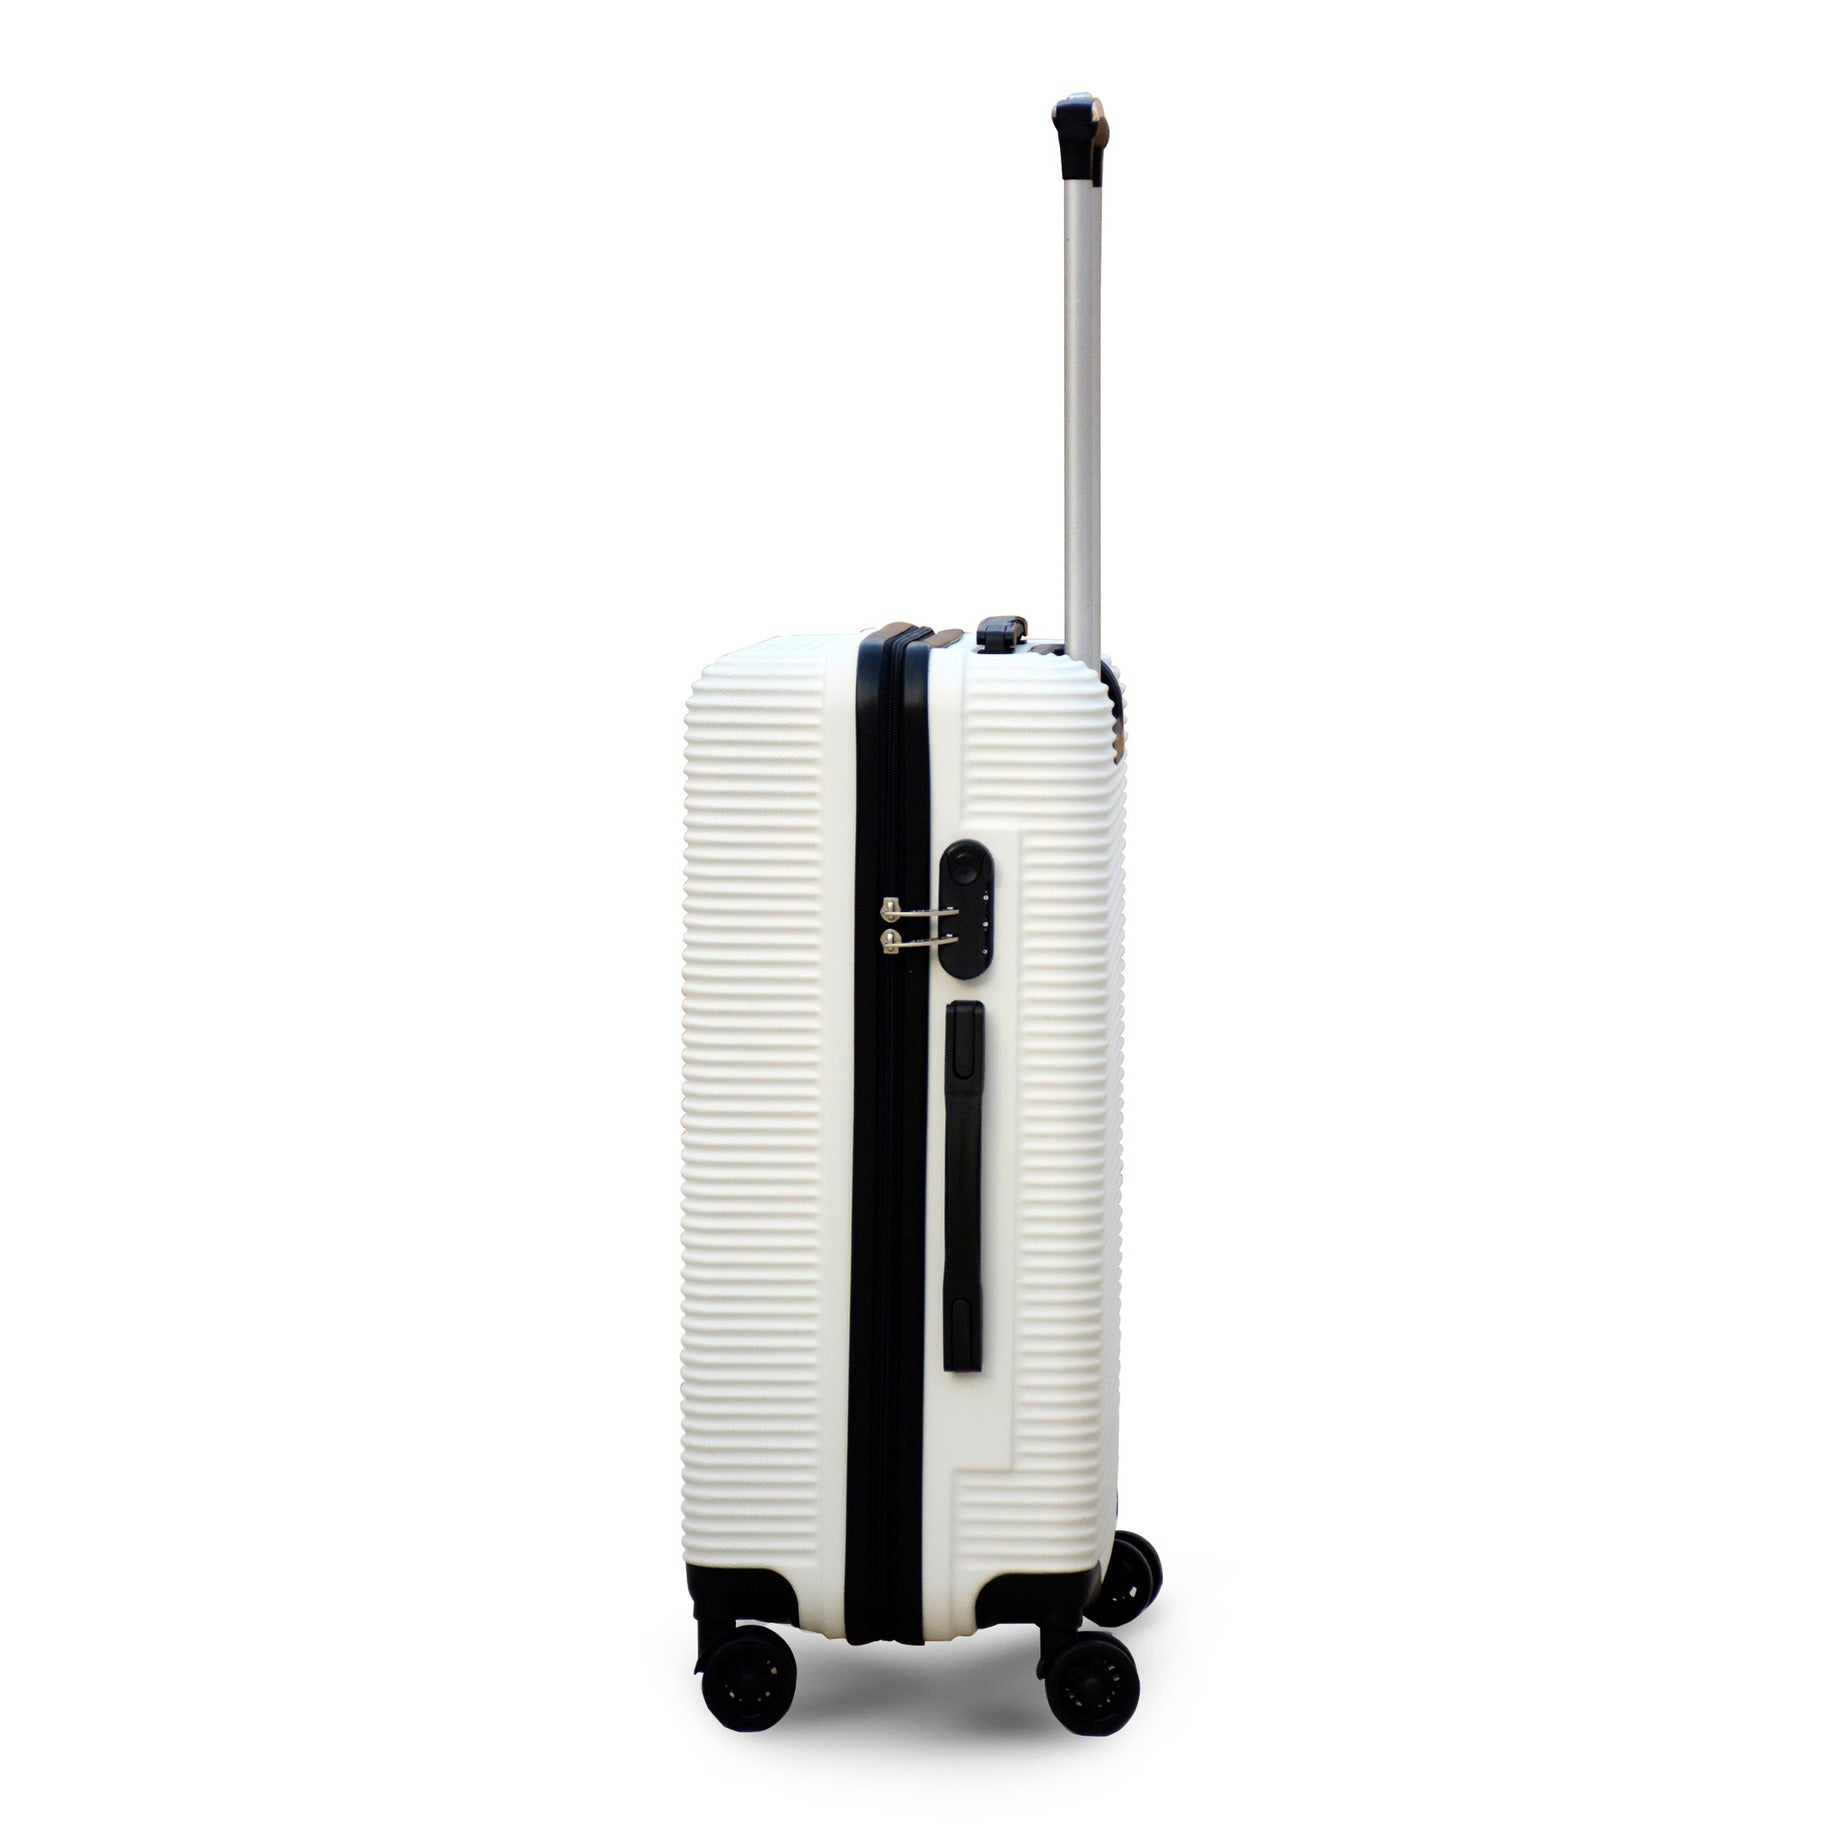 24" White Colour JIAN ABS Line Luggage Lightweight Hard Case Trolley Bag With Spinner Wheel